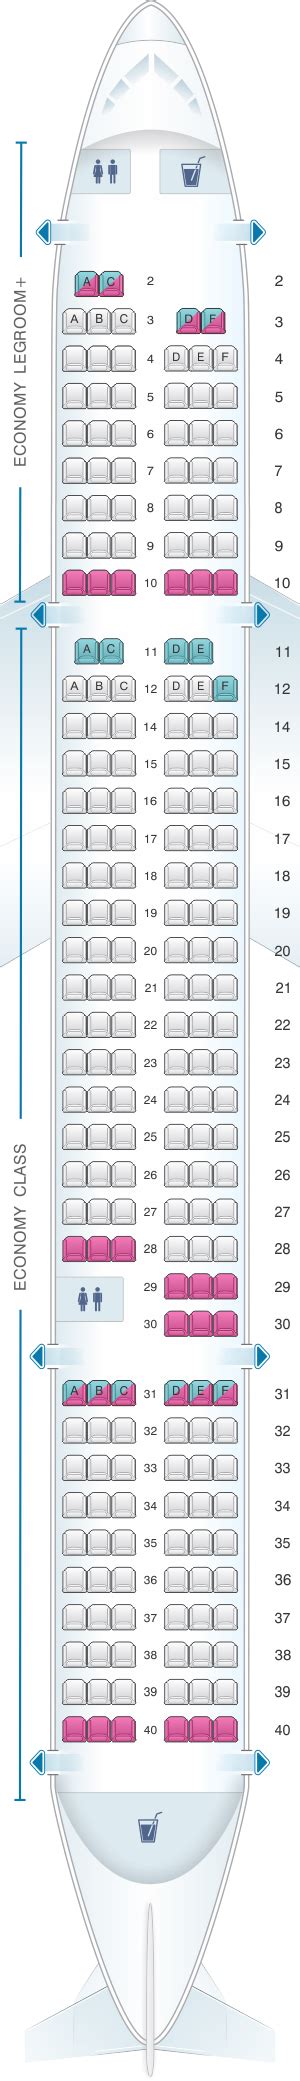 Extra legroom seats have 34 inches seat pitch while the standard seats have 30. The width of the seats in the sections is the same —17 inches. The extra legroom seats in the …